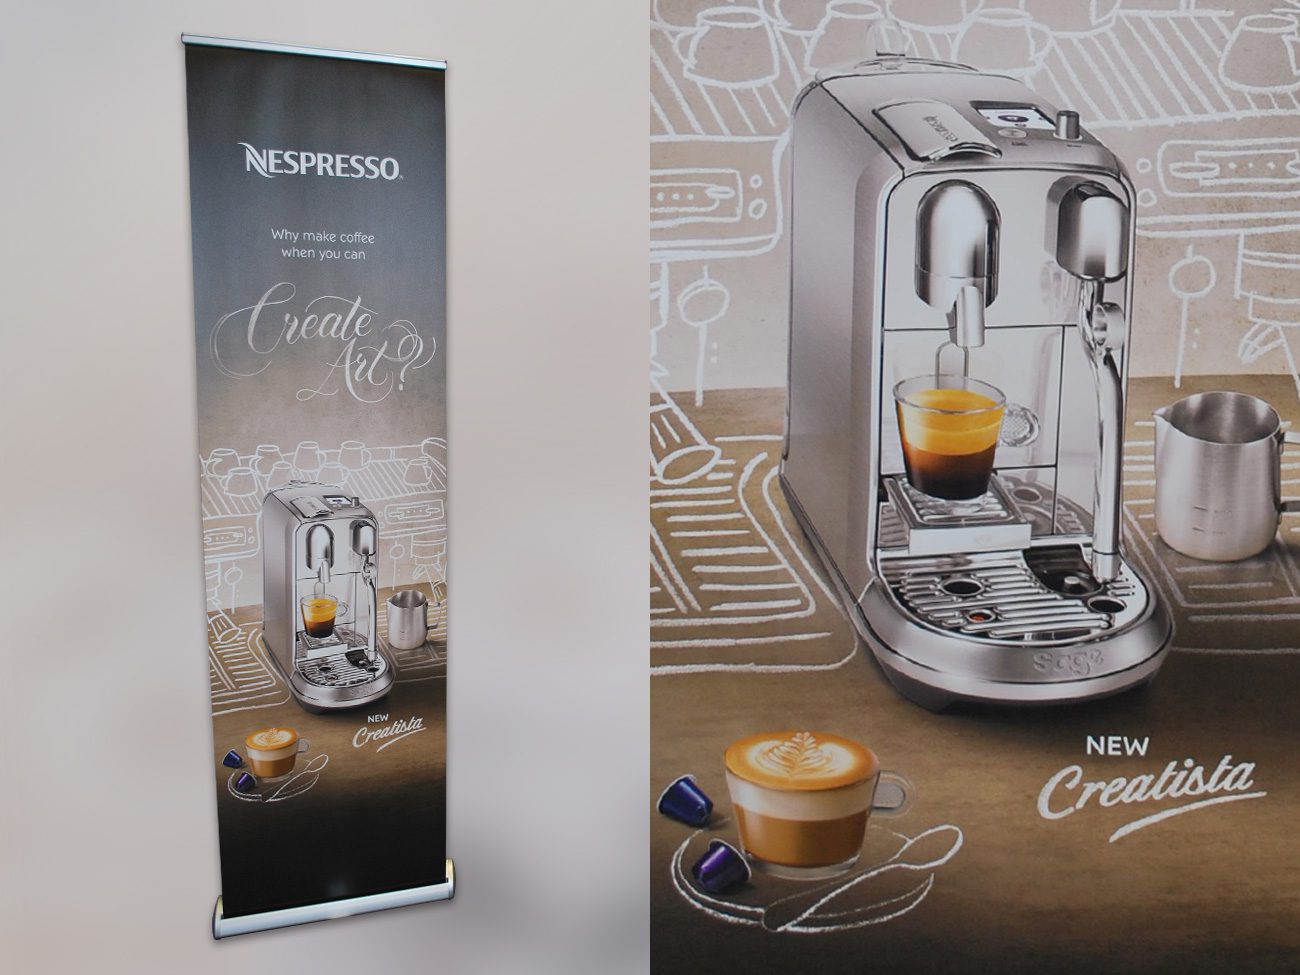 Nespresso Pull-up Banners